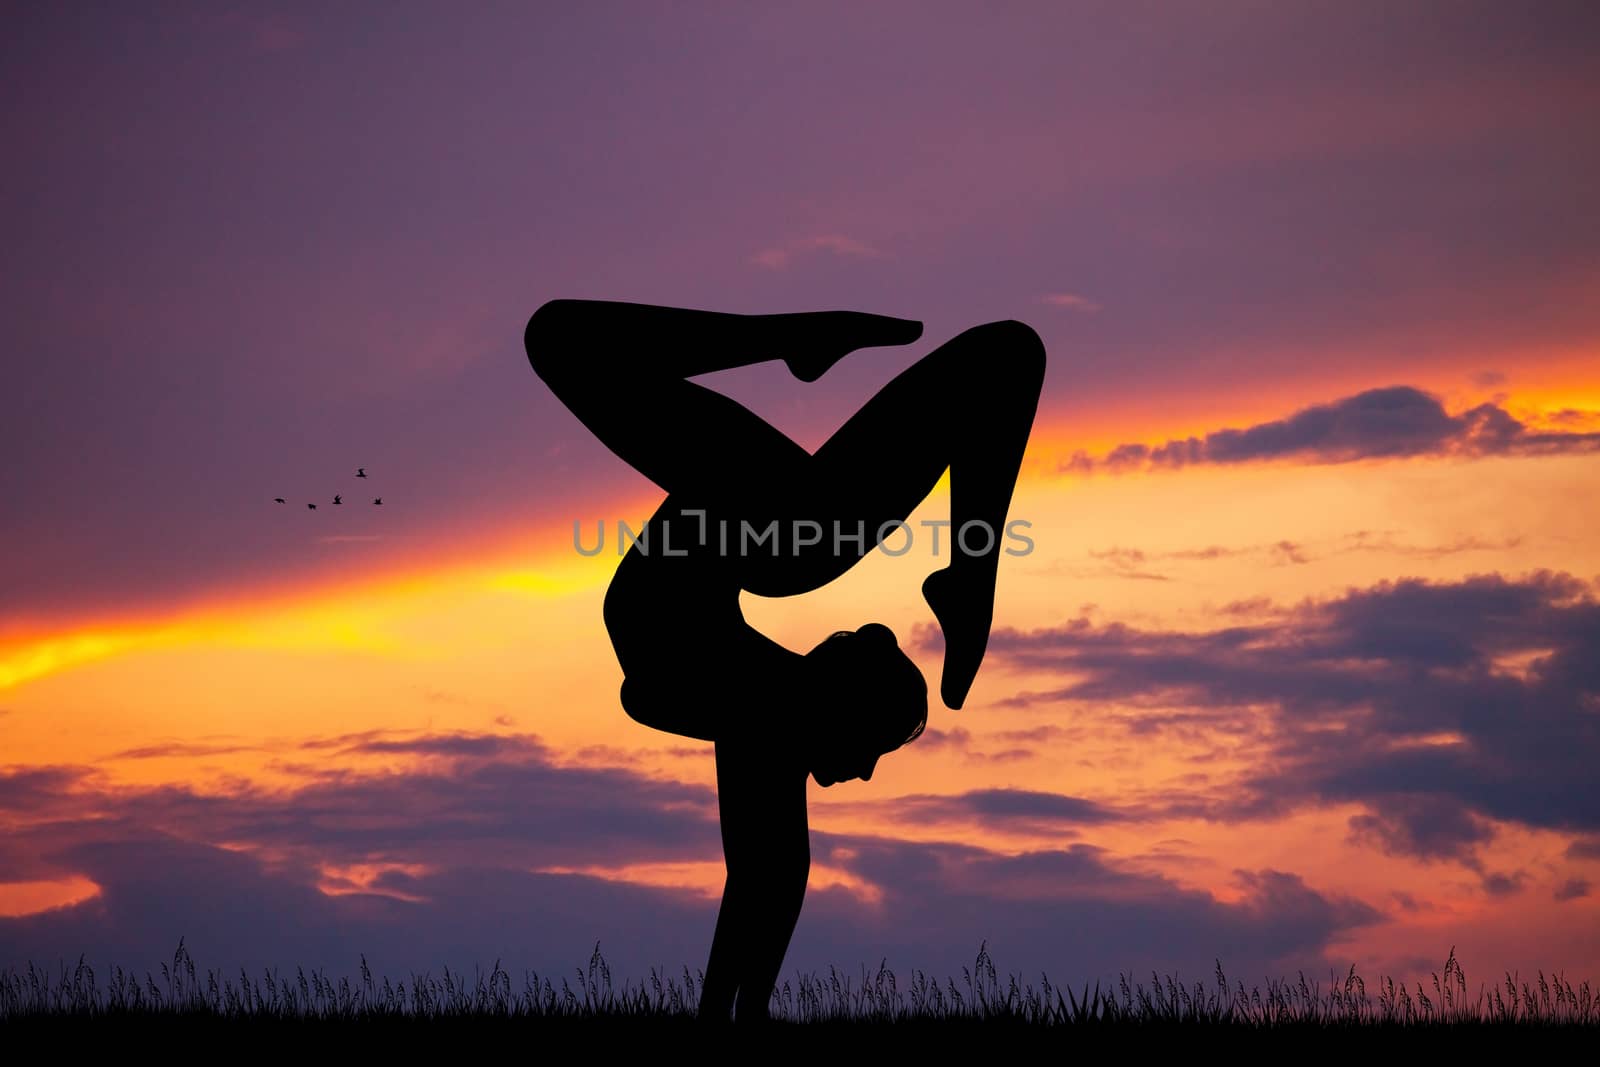 contortion at sunset by adrenalina